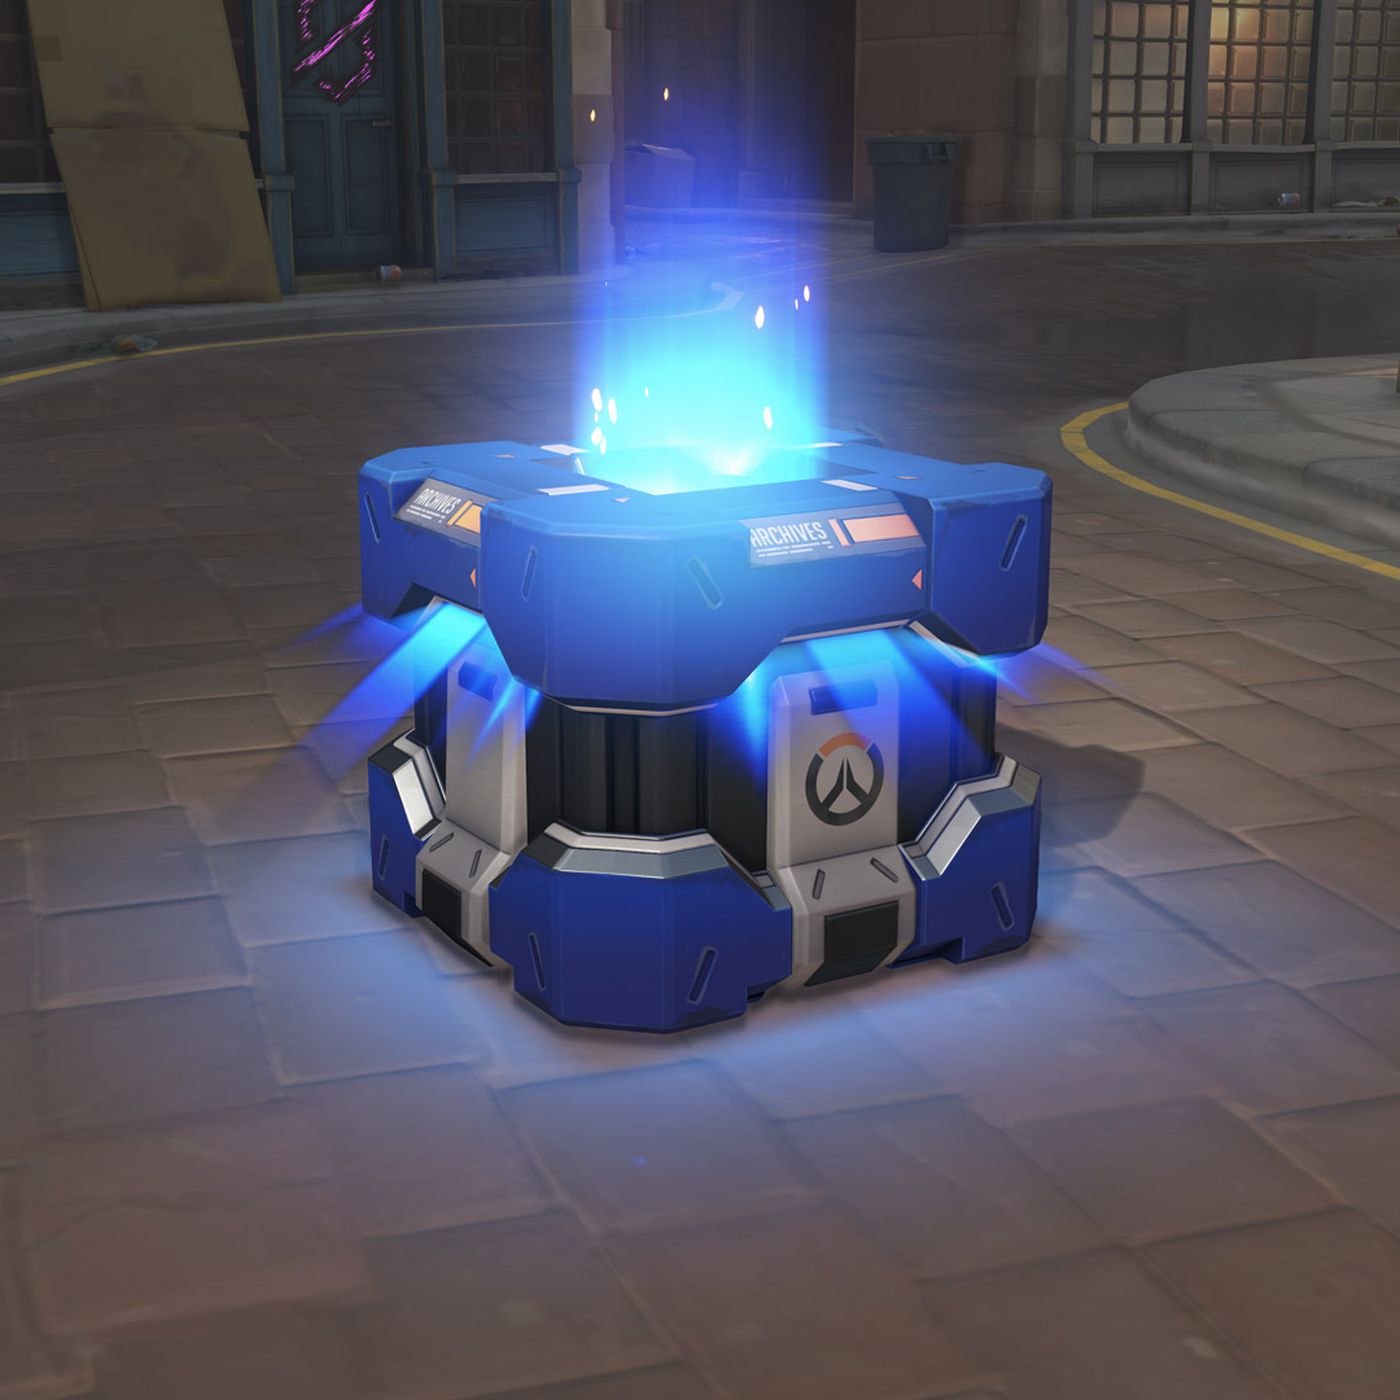 Loot boxes: as harmless as gambling – Your Voice Heard